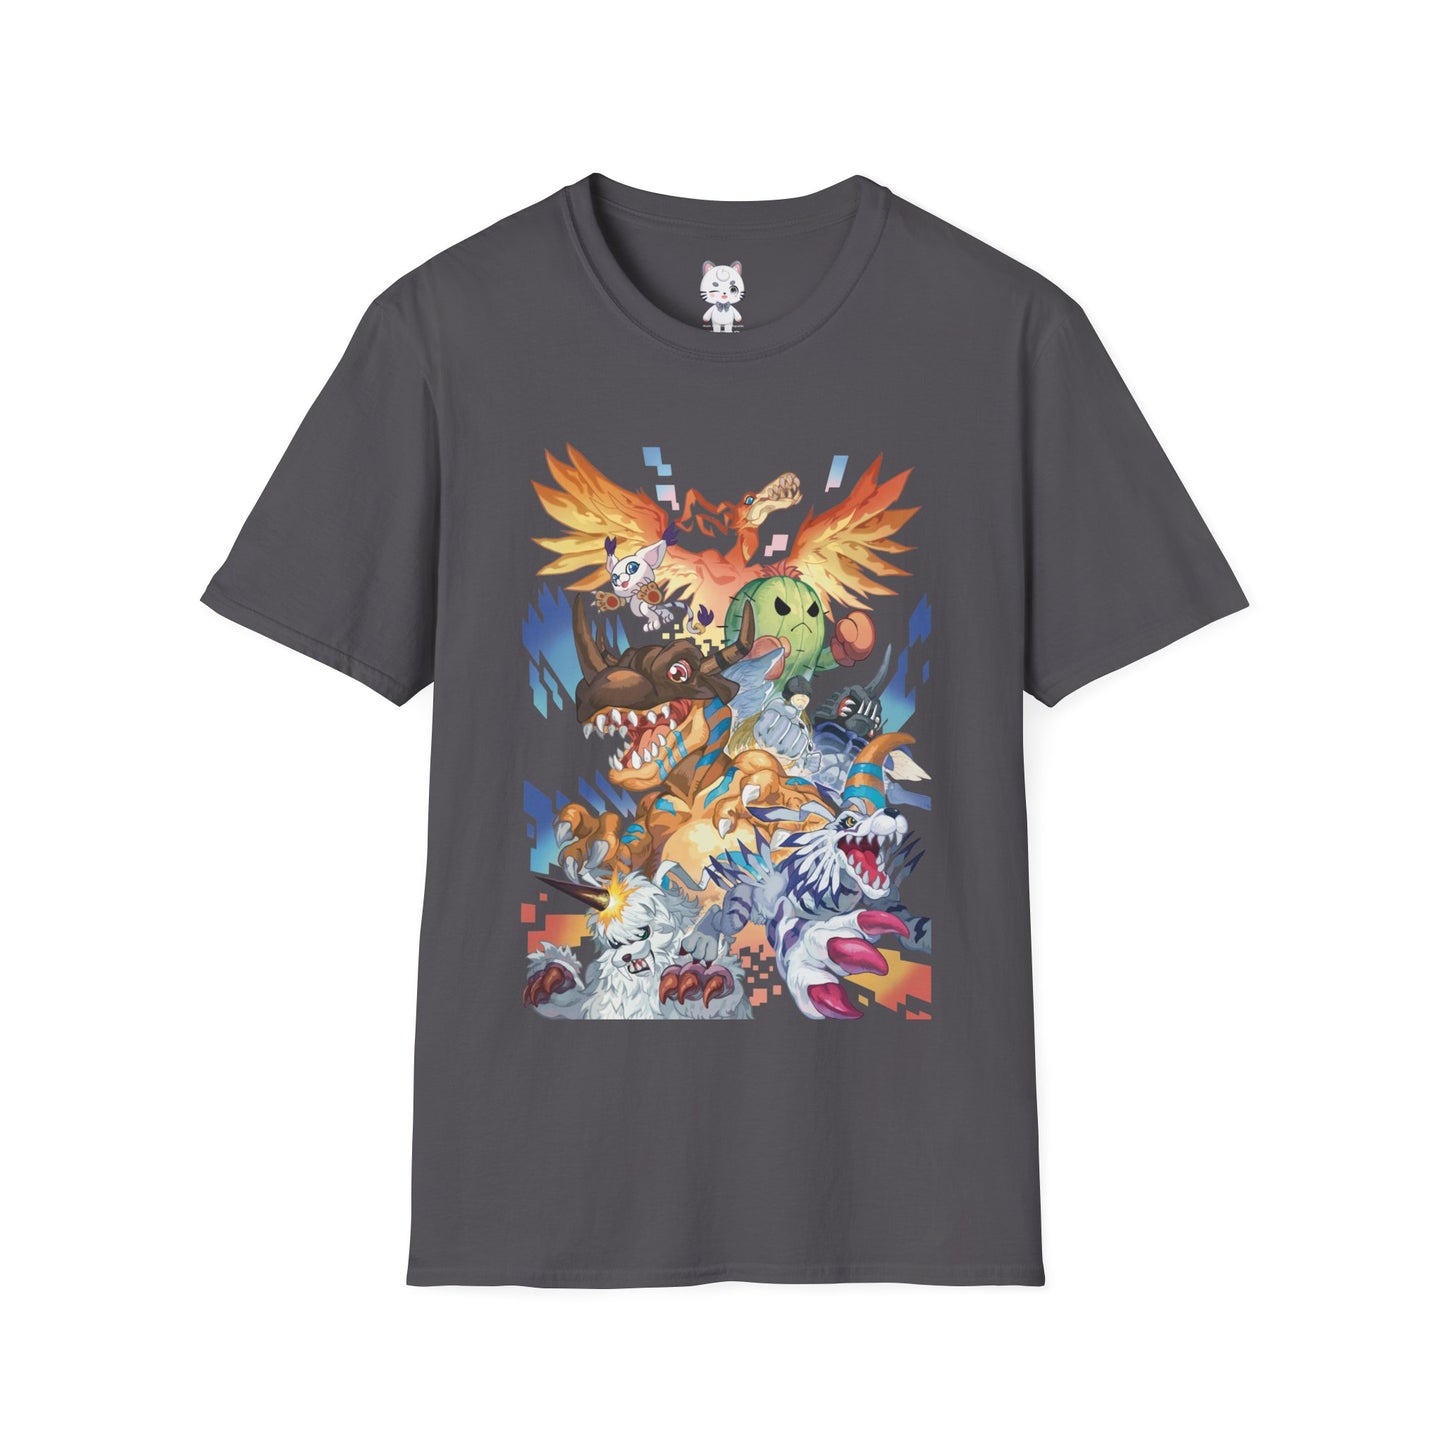 Digimon 01 T-Shirt Design by Currynoodleart